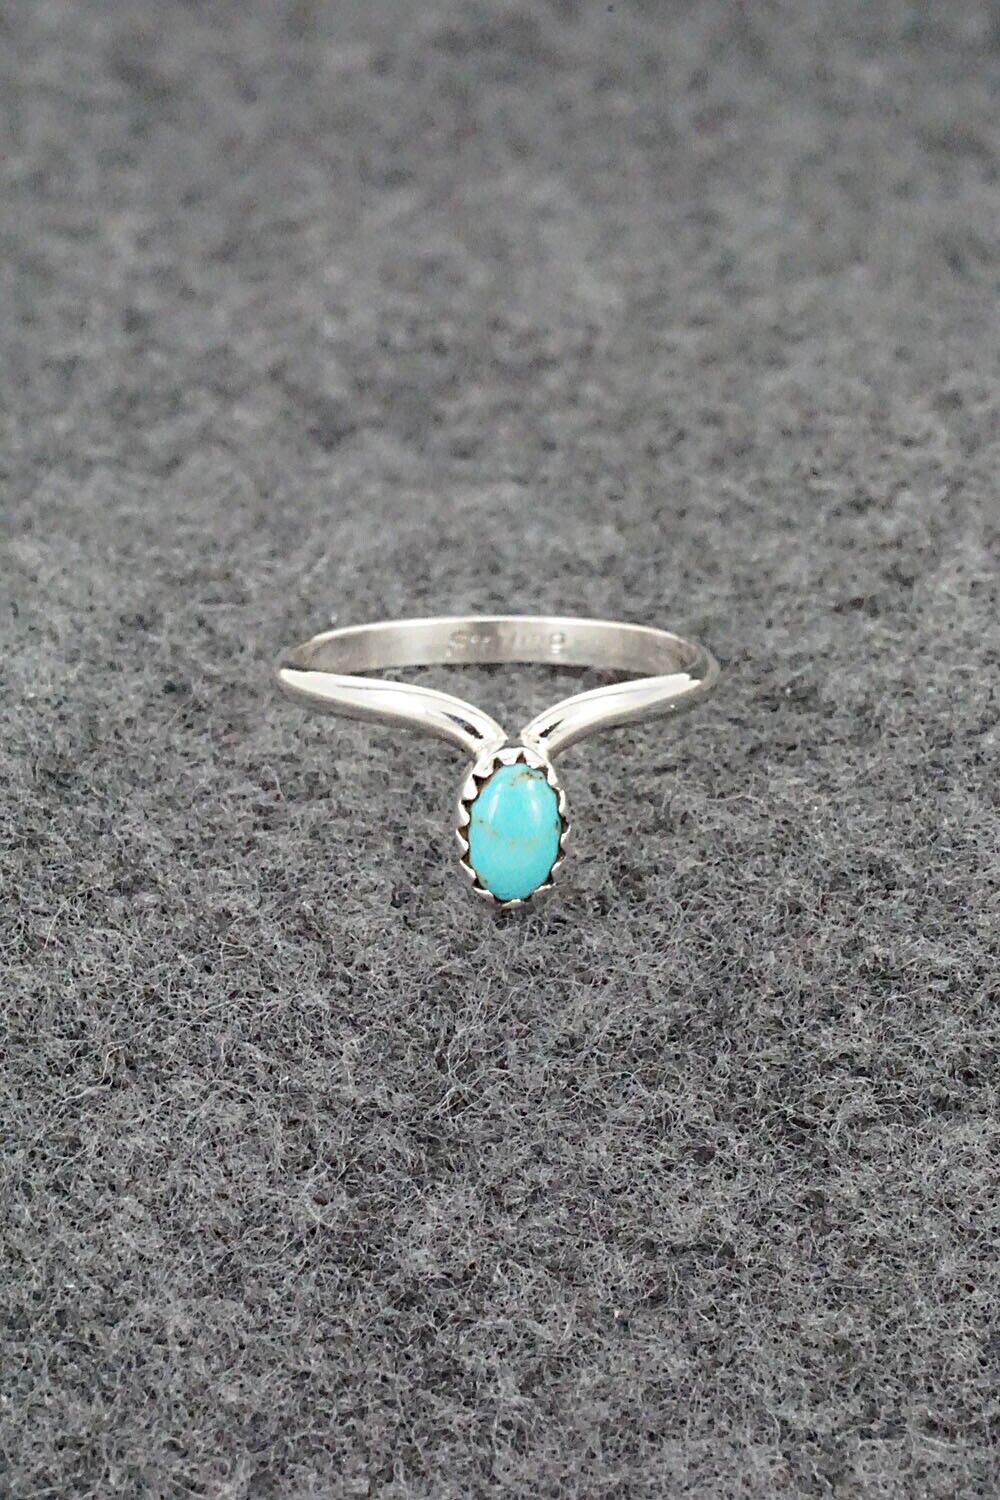 Turquoise & Sterling Silver Ring - Hiram Largo - Size 8.5